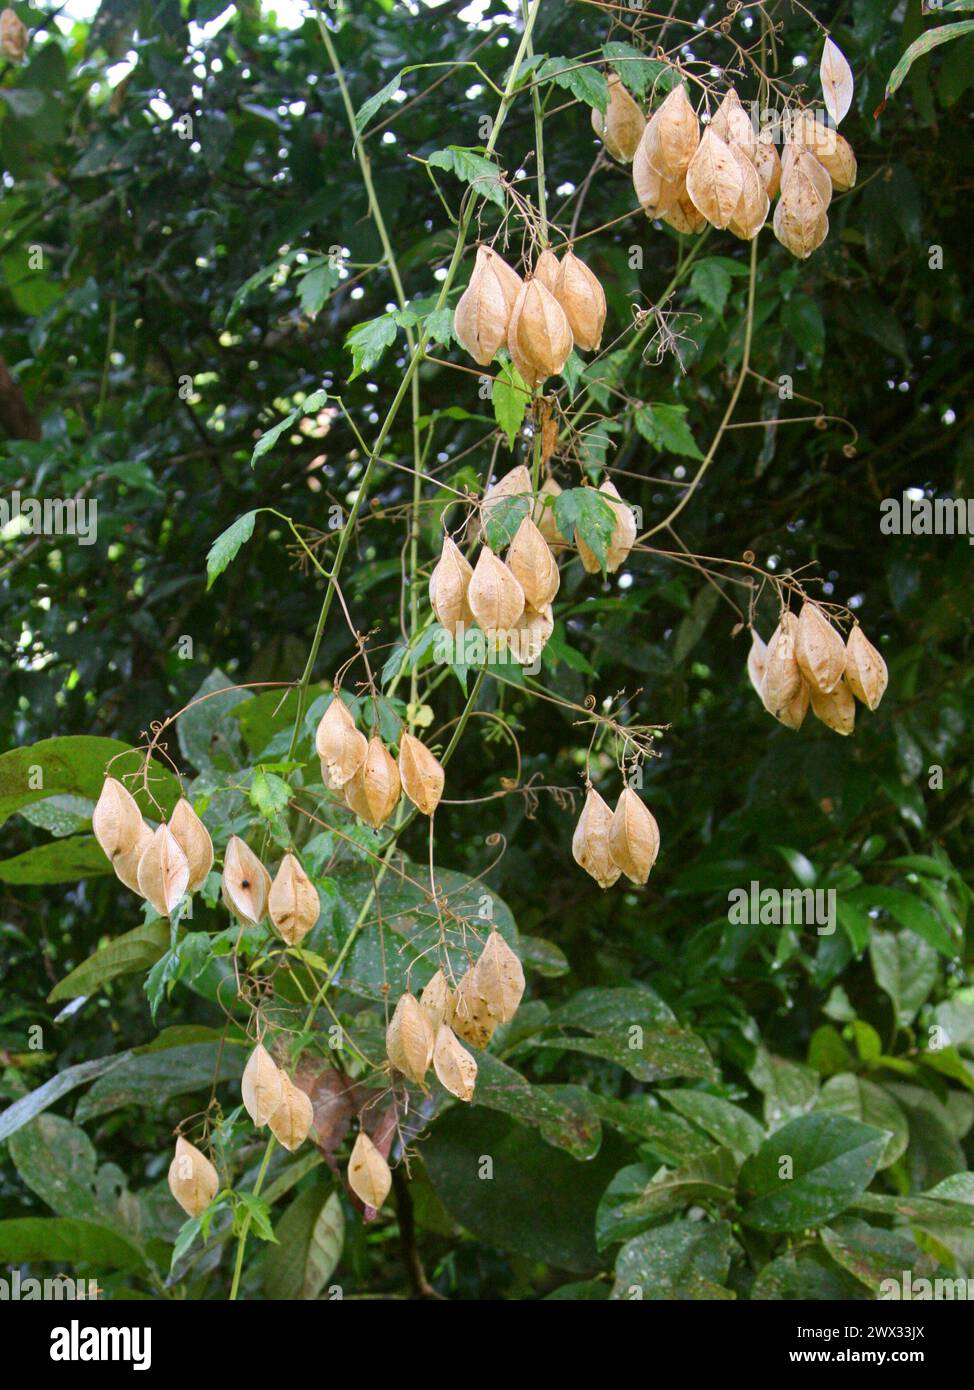 Showy Balloonvine, Heart Pea or Heart Seed, Cardiospermum grandiflorum, Sapindaceae. Costa Rica. Tropical herbaceous vine with cased fruit pods. Stock Photo